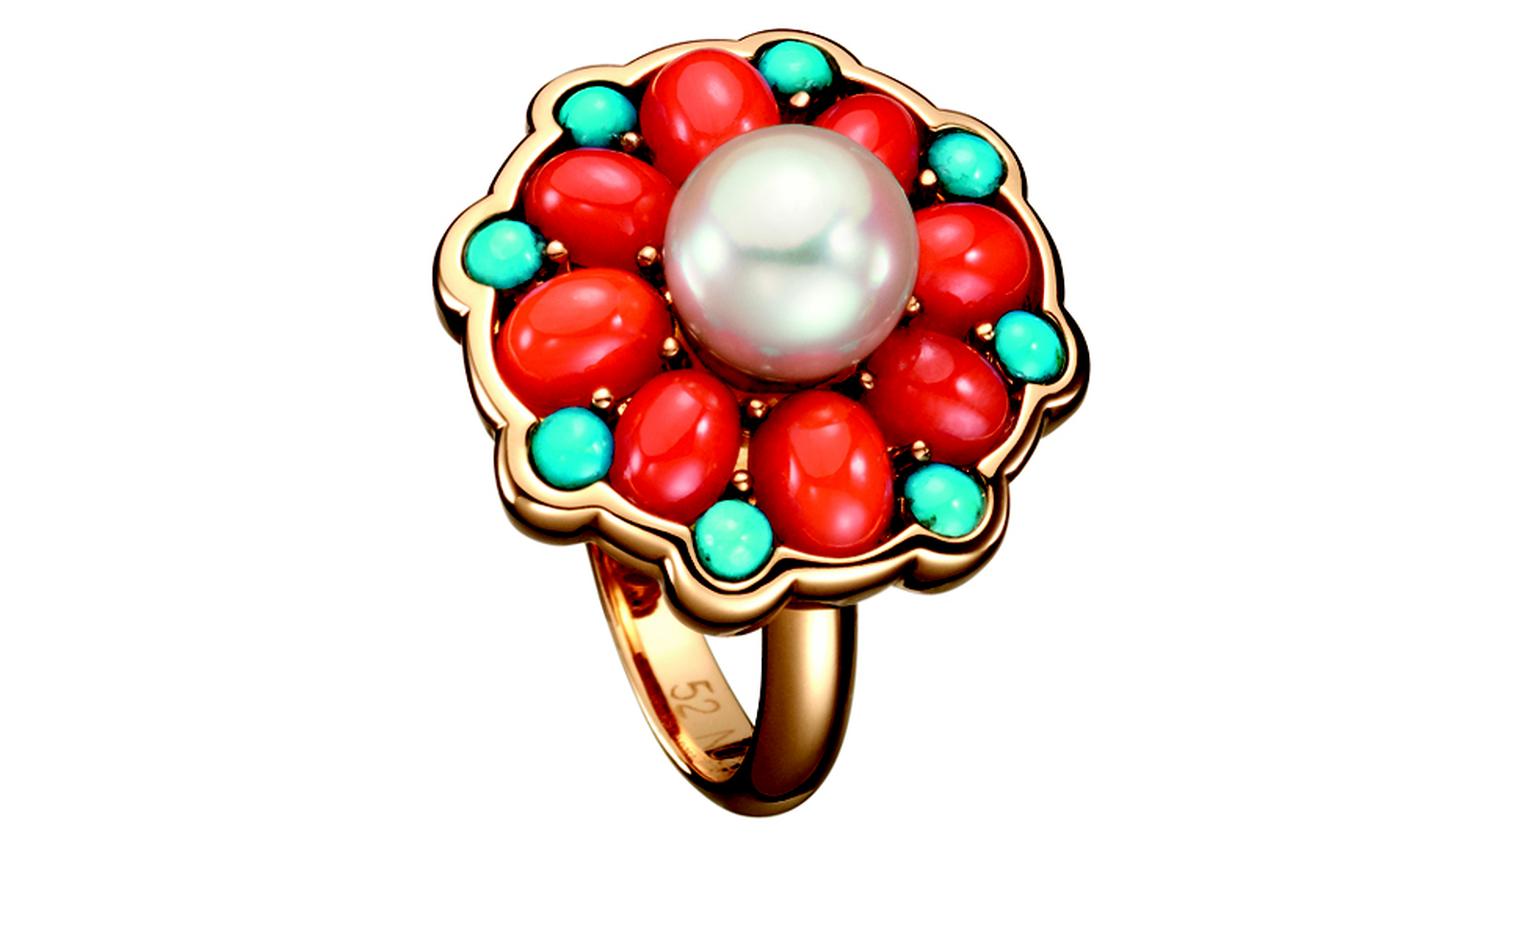 BOUCHERON. Paraggi ring, set with round cultured pearls, round turquoise and oval red corals, on pink gold. POA